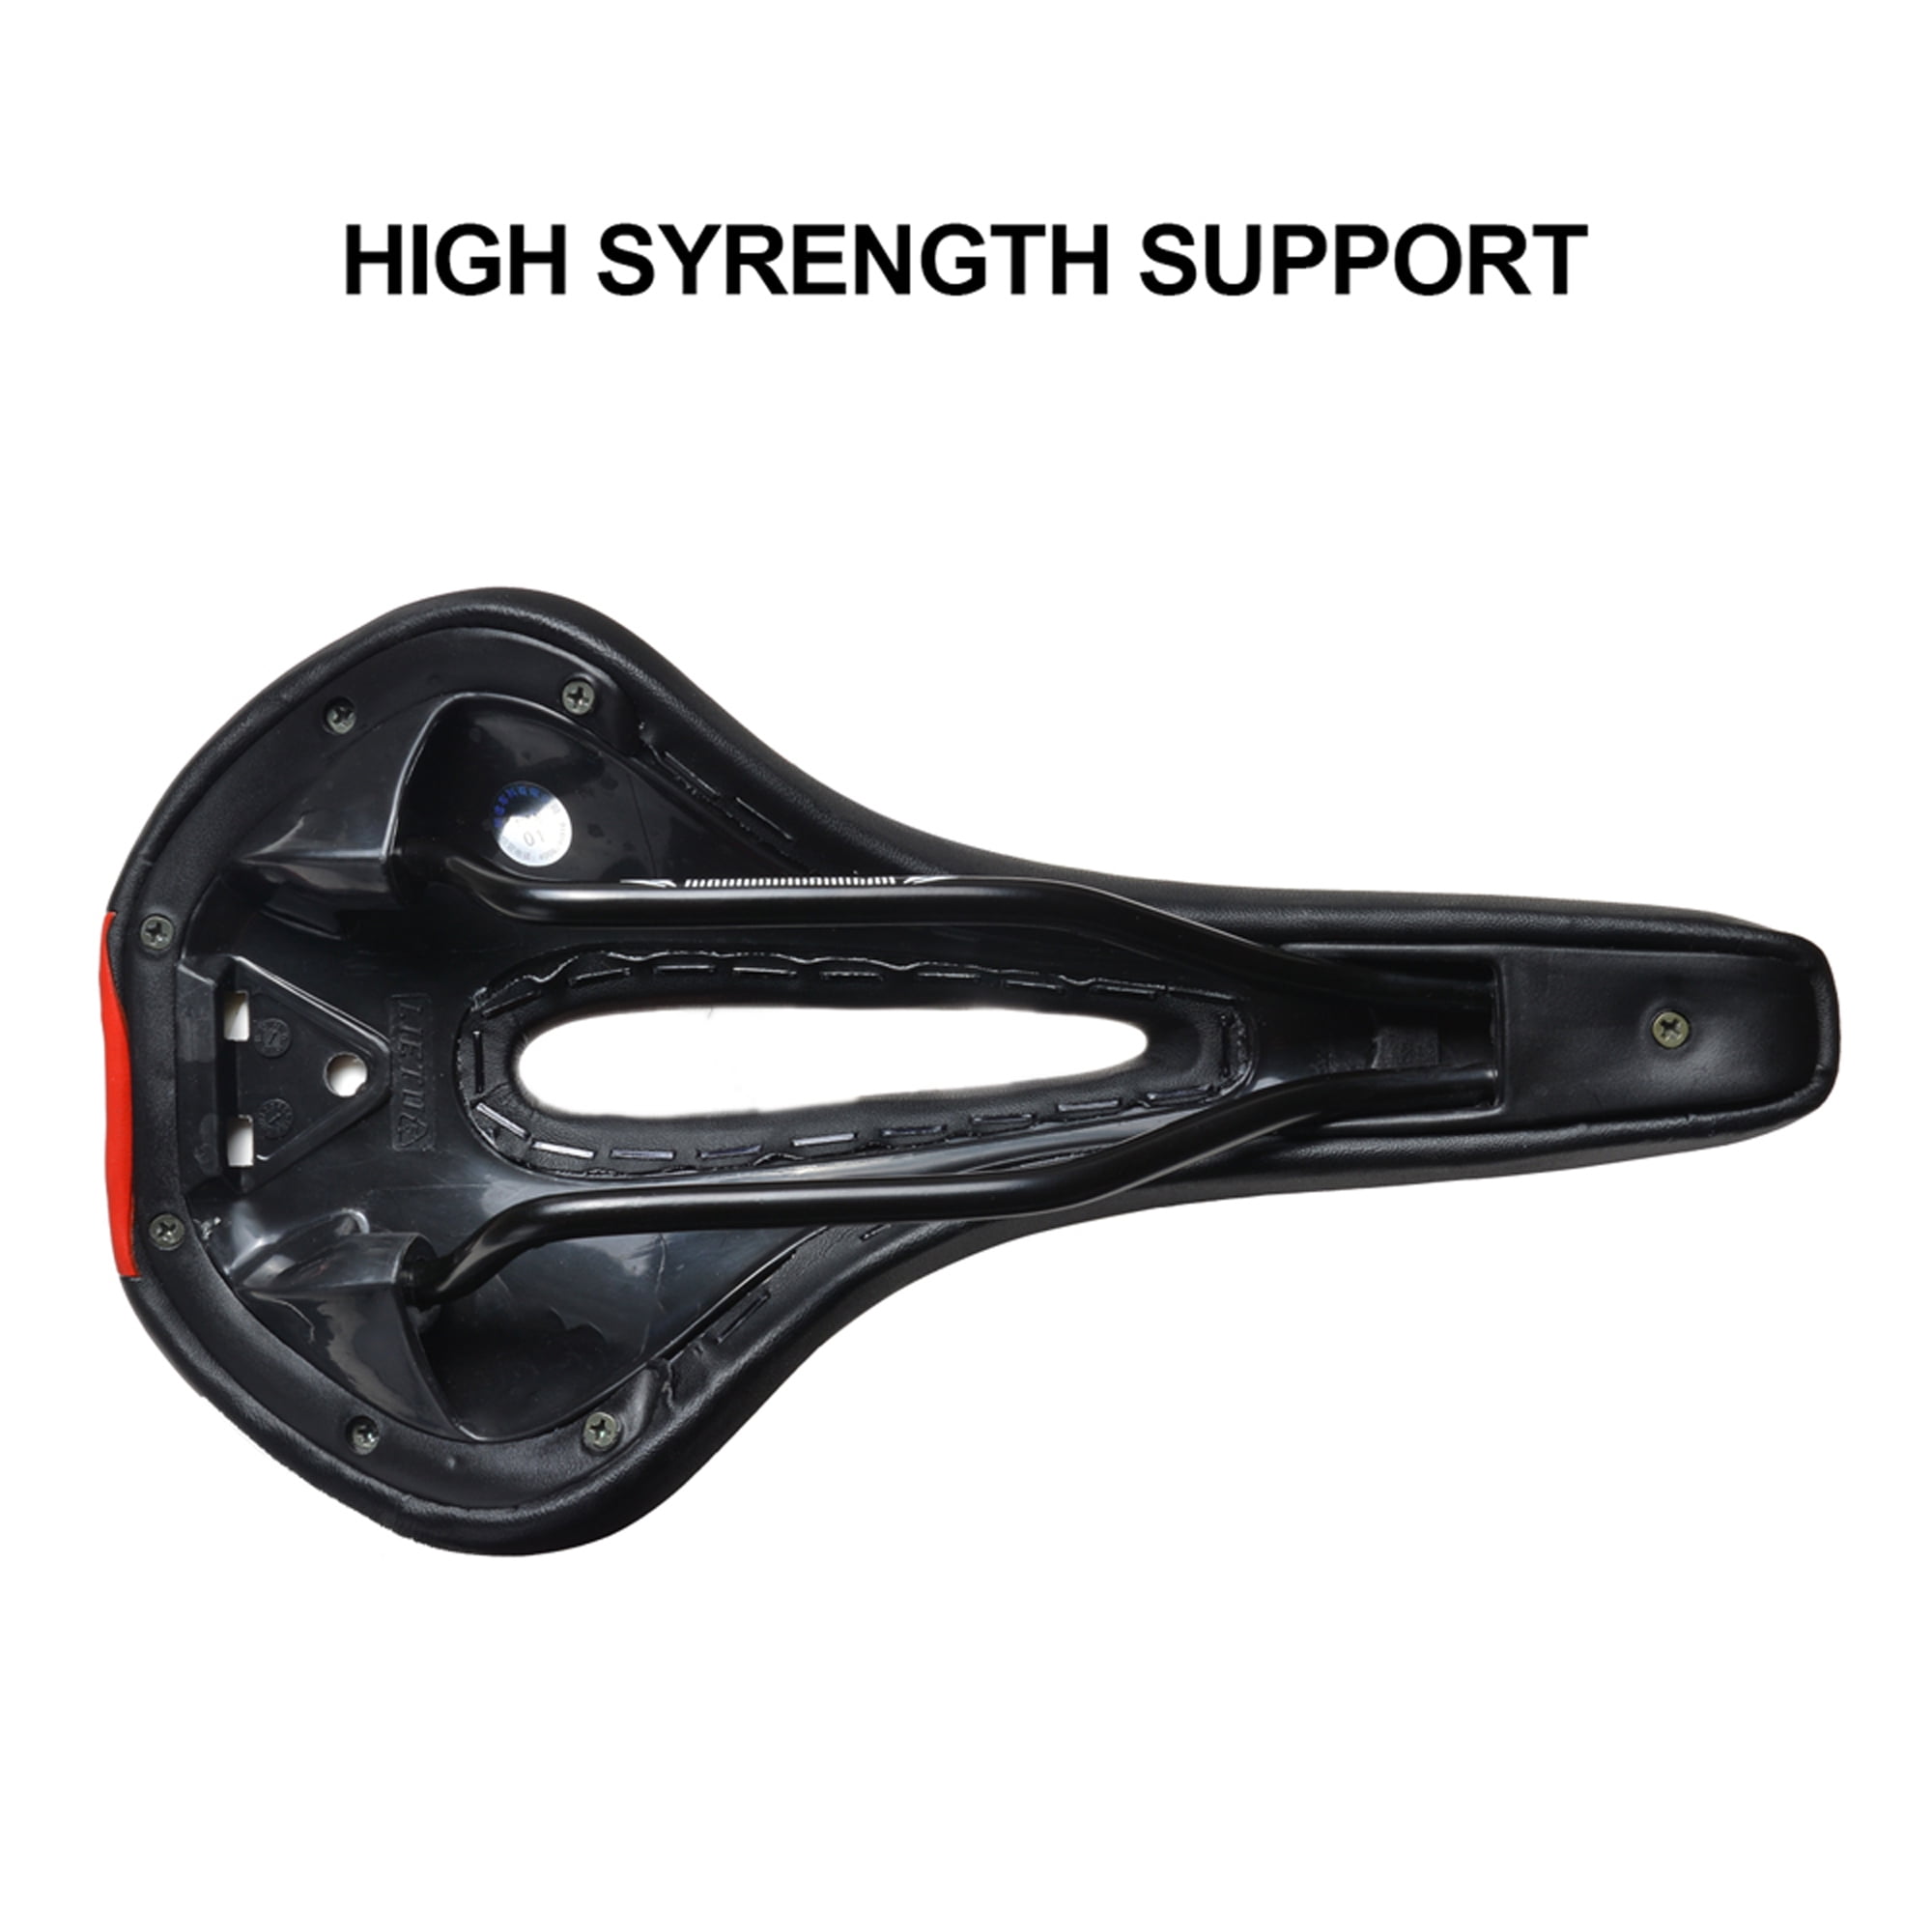 Professional Mountain Bike Cushion Soft Pad Bike Saddle Seat Odoland Bike Seat Include Gel Seat Cover & Setting Tools Universal Bicycle Saddle for All Bicycles 